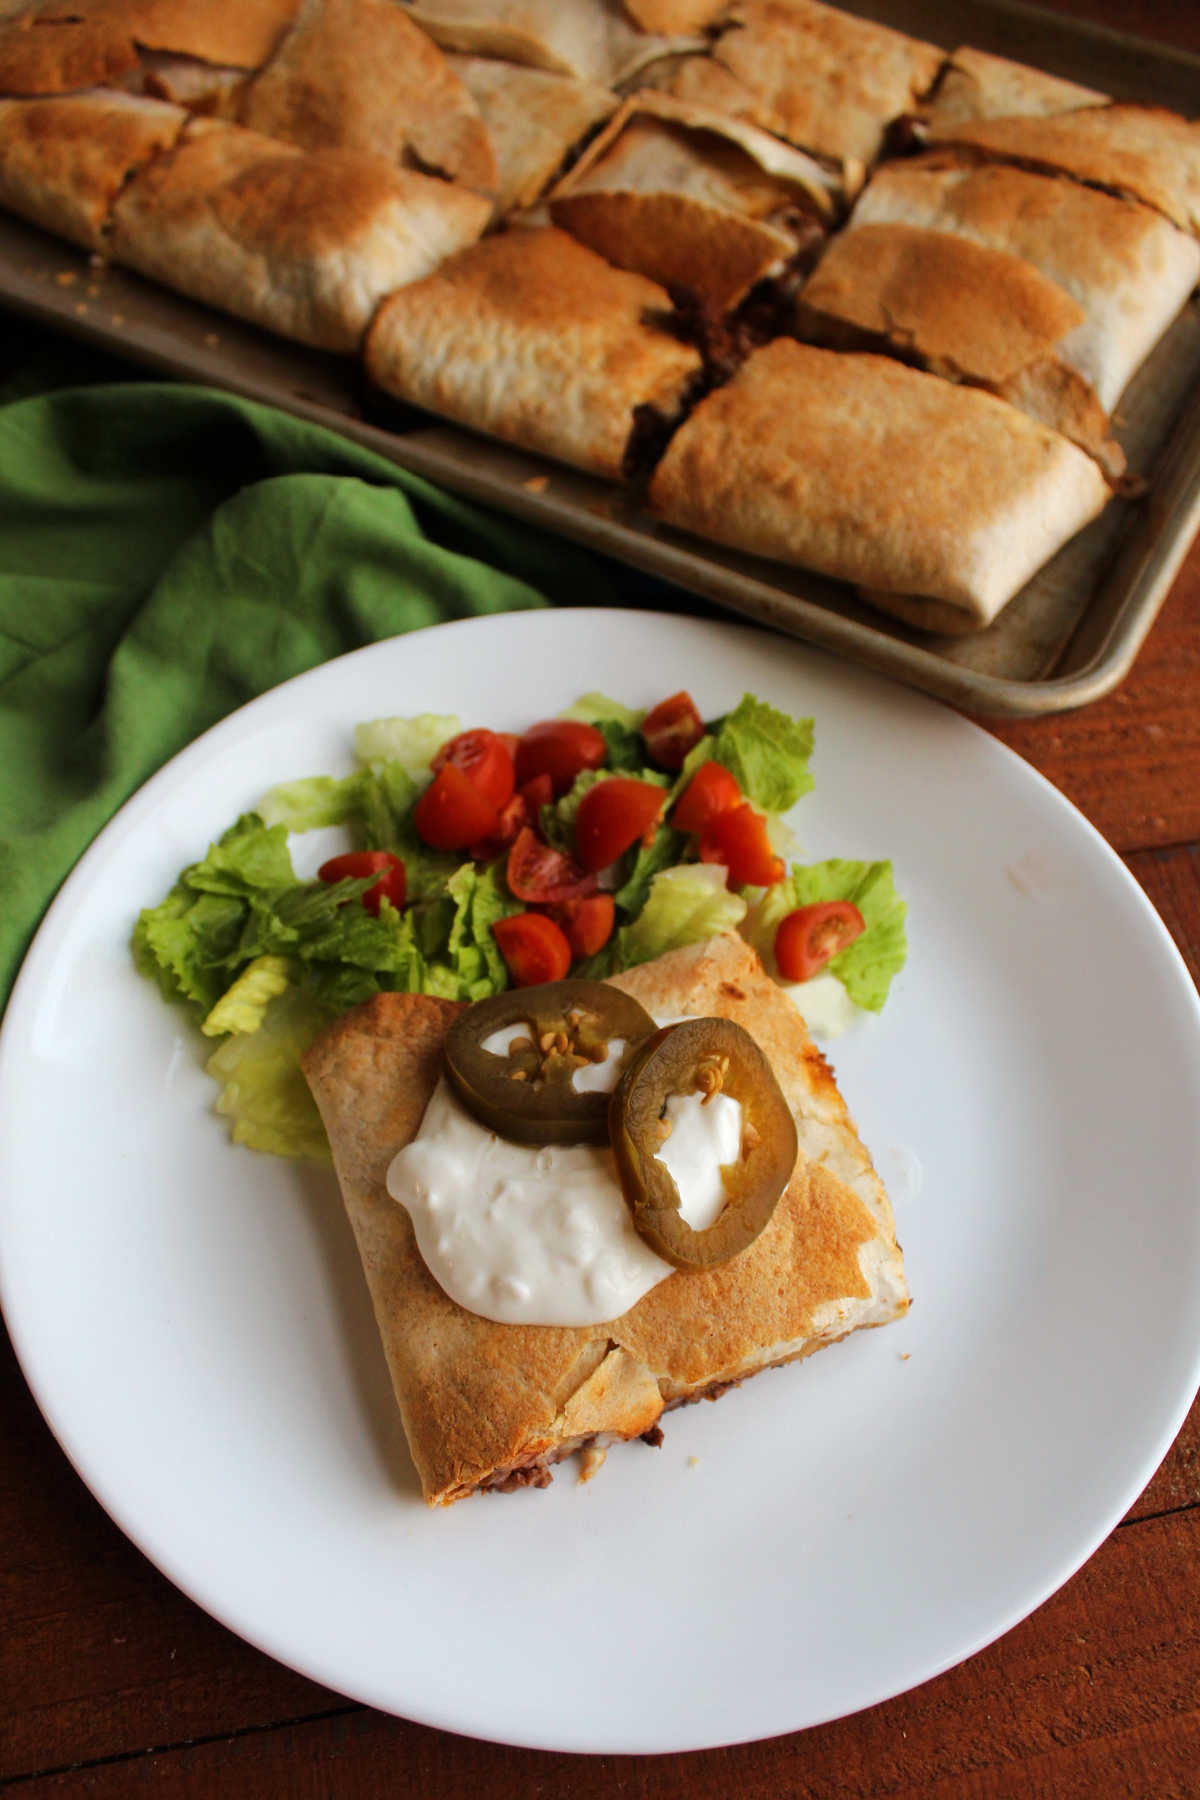 Piece of baked quesadilla topped with sour cream and jalapenos and served with shredded lettuce and diced tomatoes.